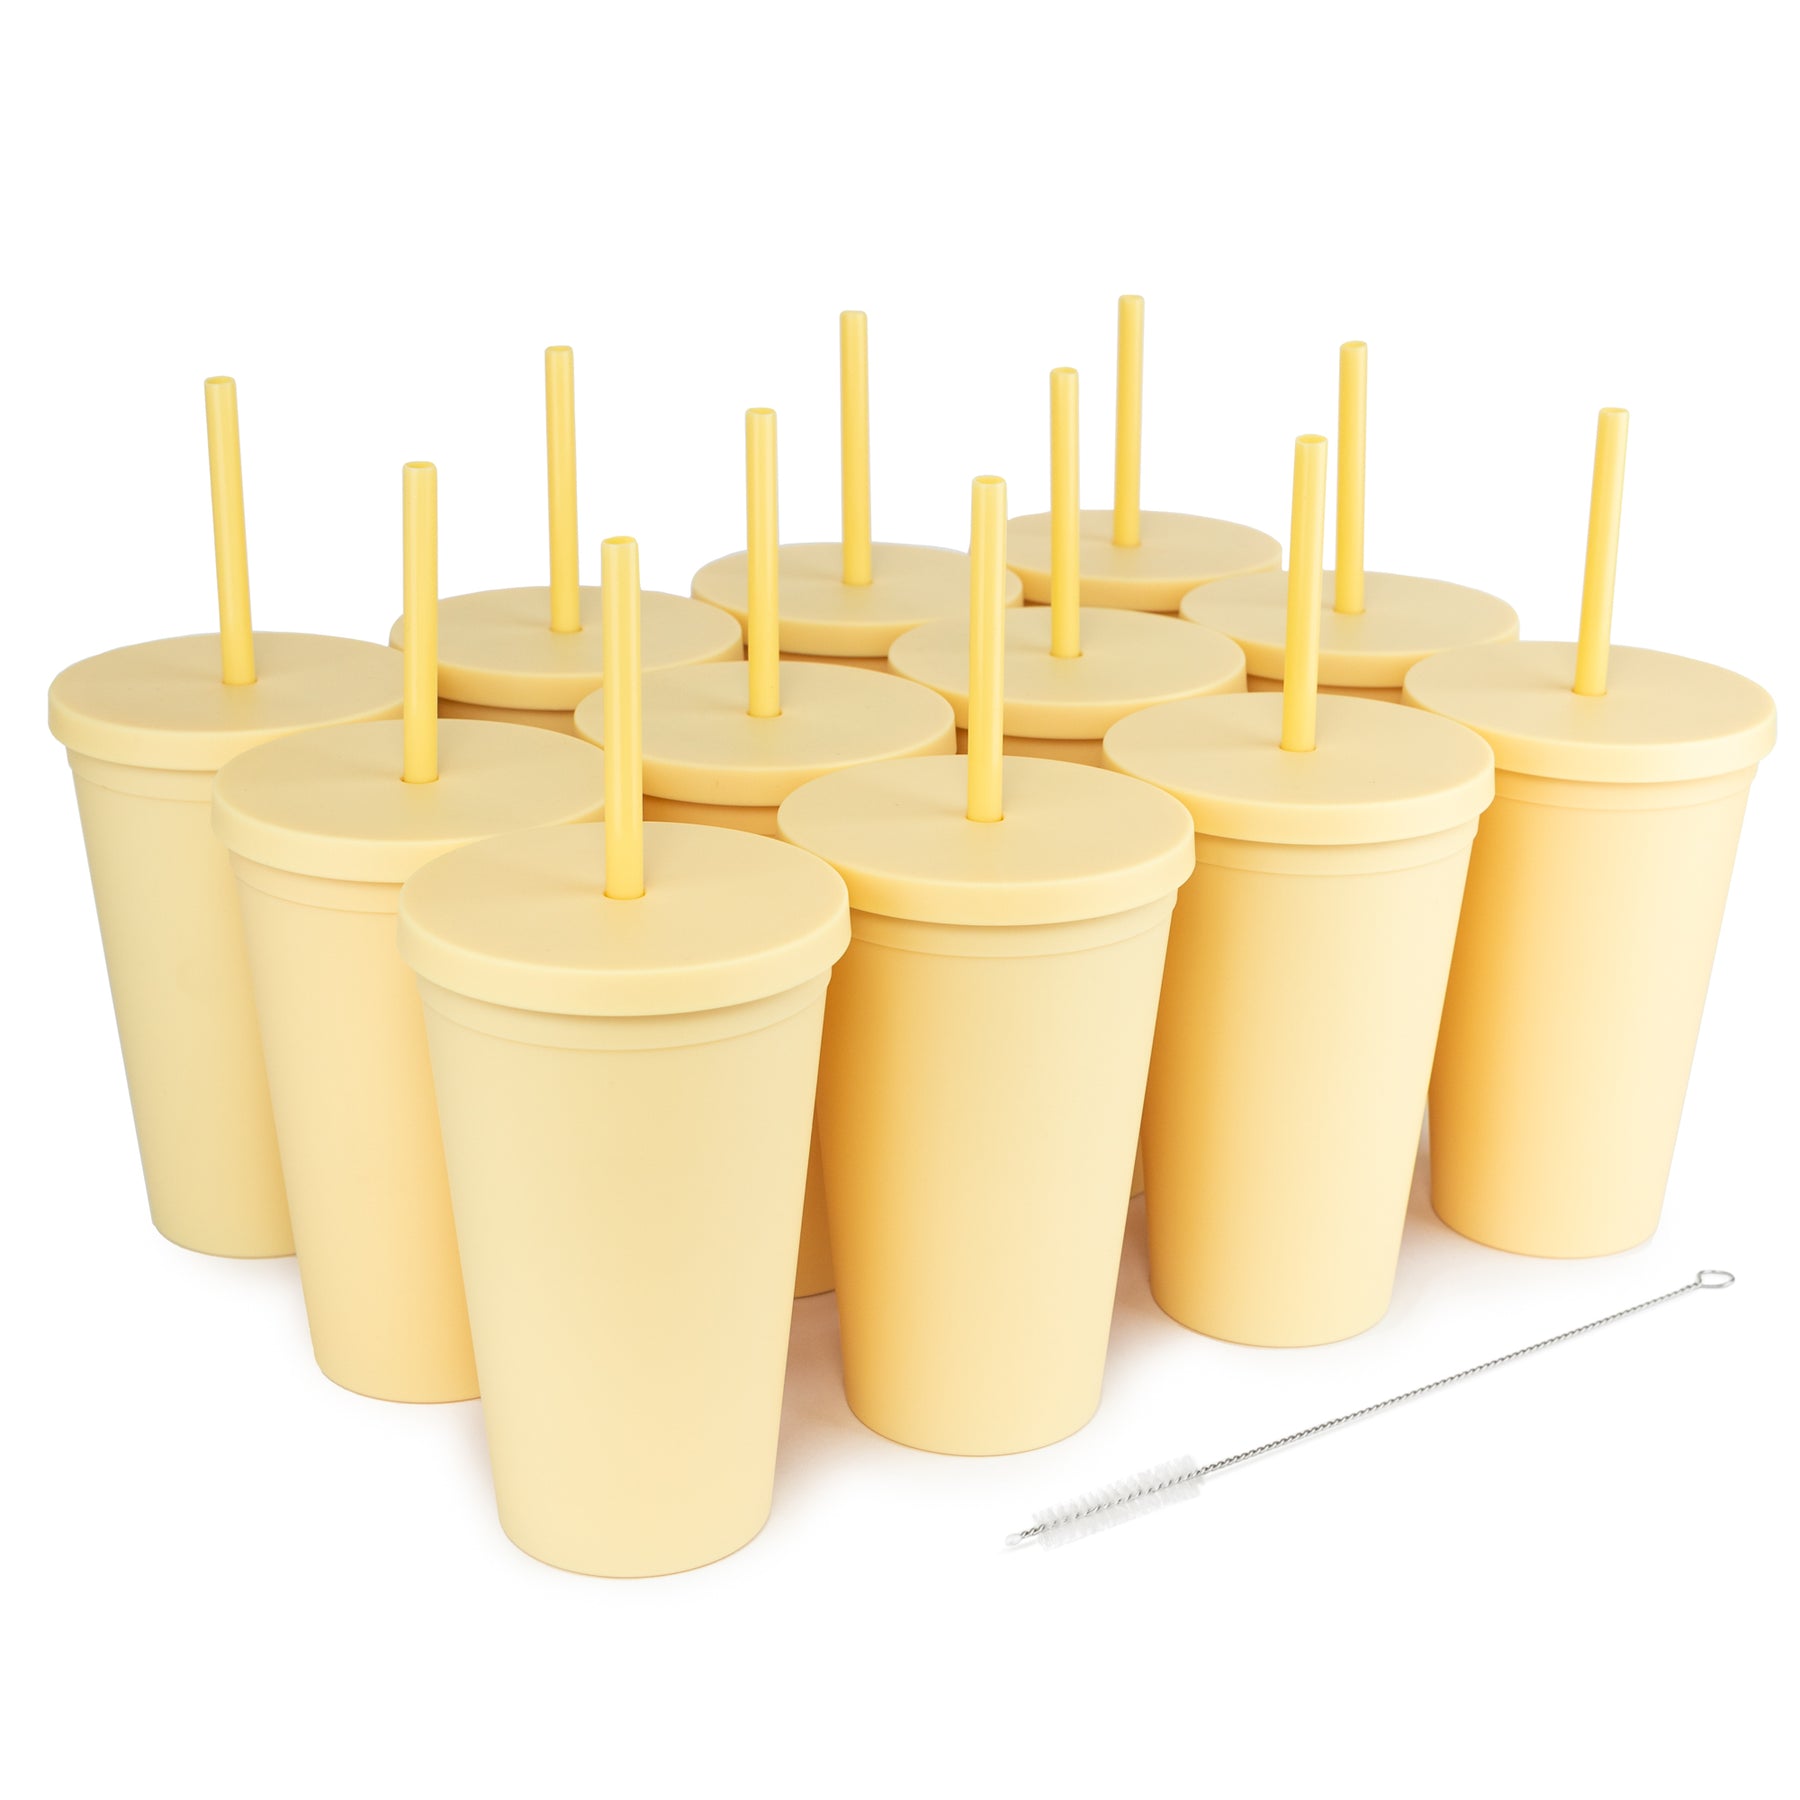 STRATA CUPS Classic Multicolor Tumblers with Lids and Straws (8 pack) -  22oz Matte Pastel Colored Ac…See more STRATA CUPS Classic Multicolor  Tumblers